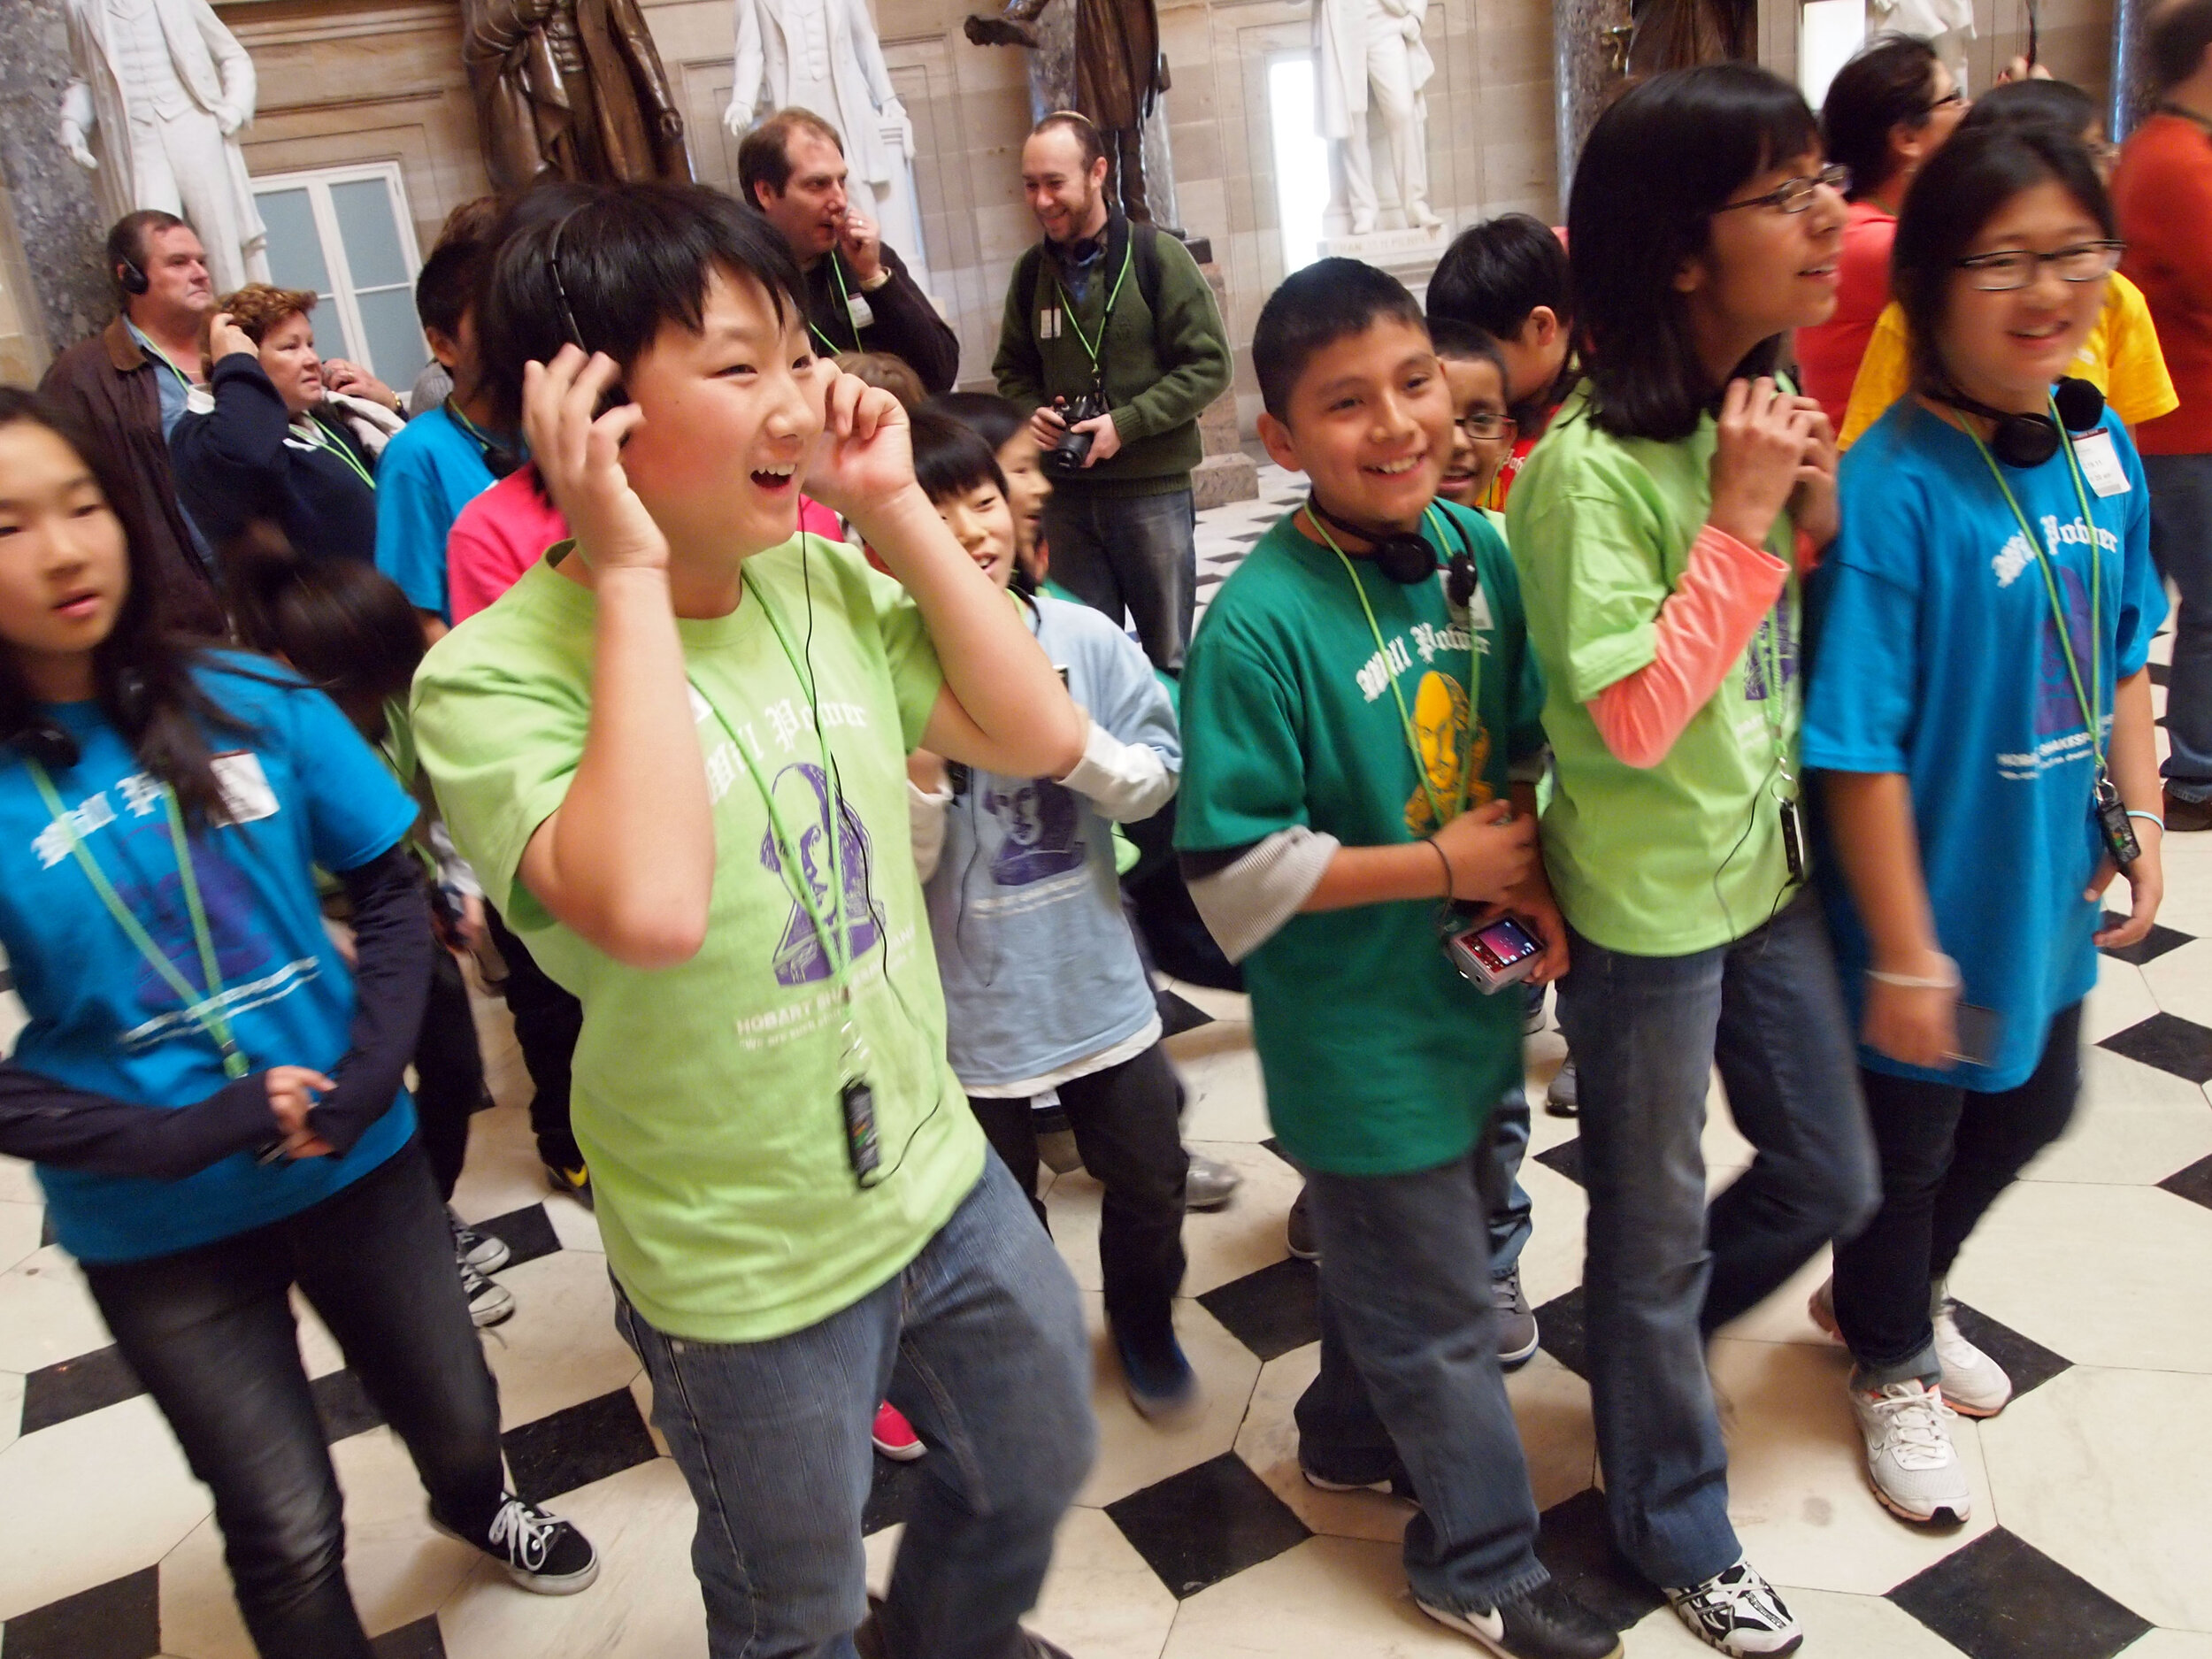  Learning and Having Fun Inside the U.S. Capitol 